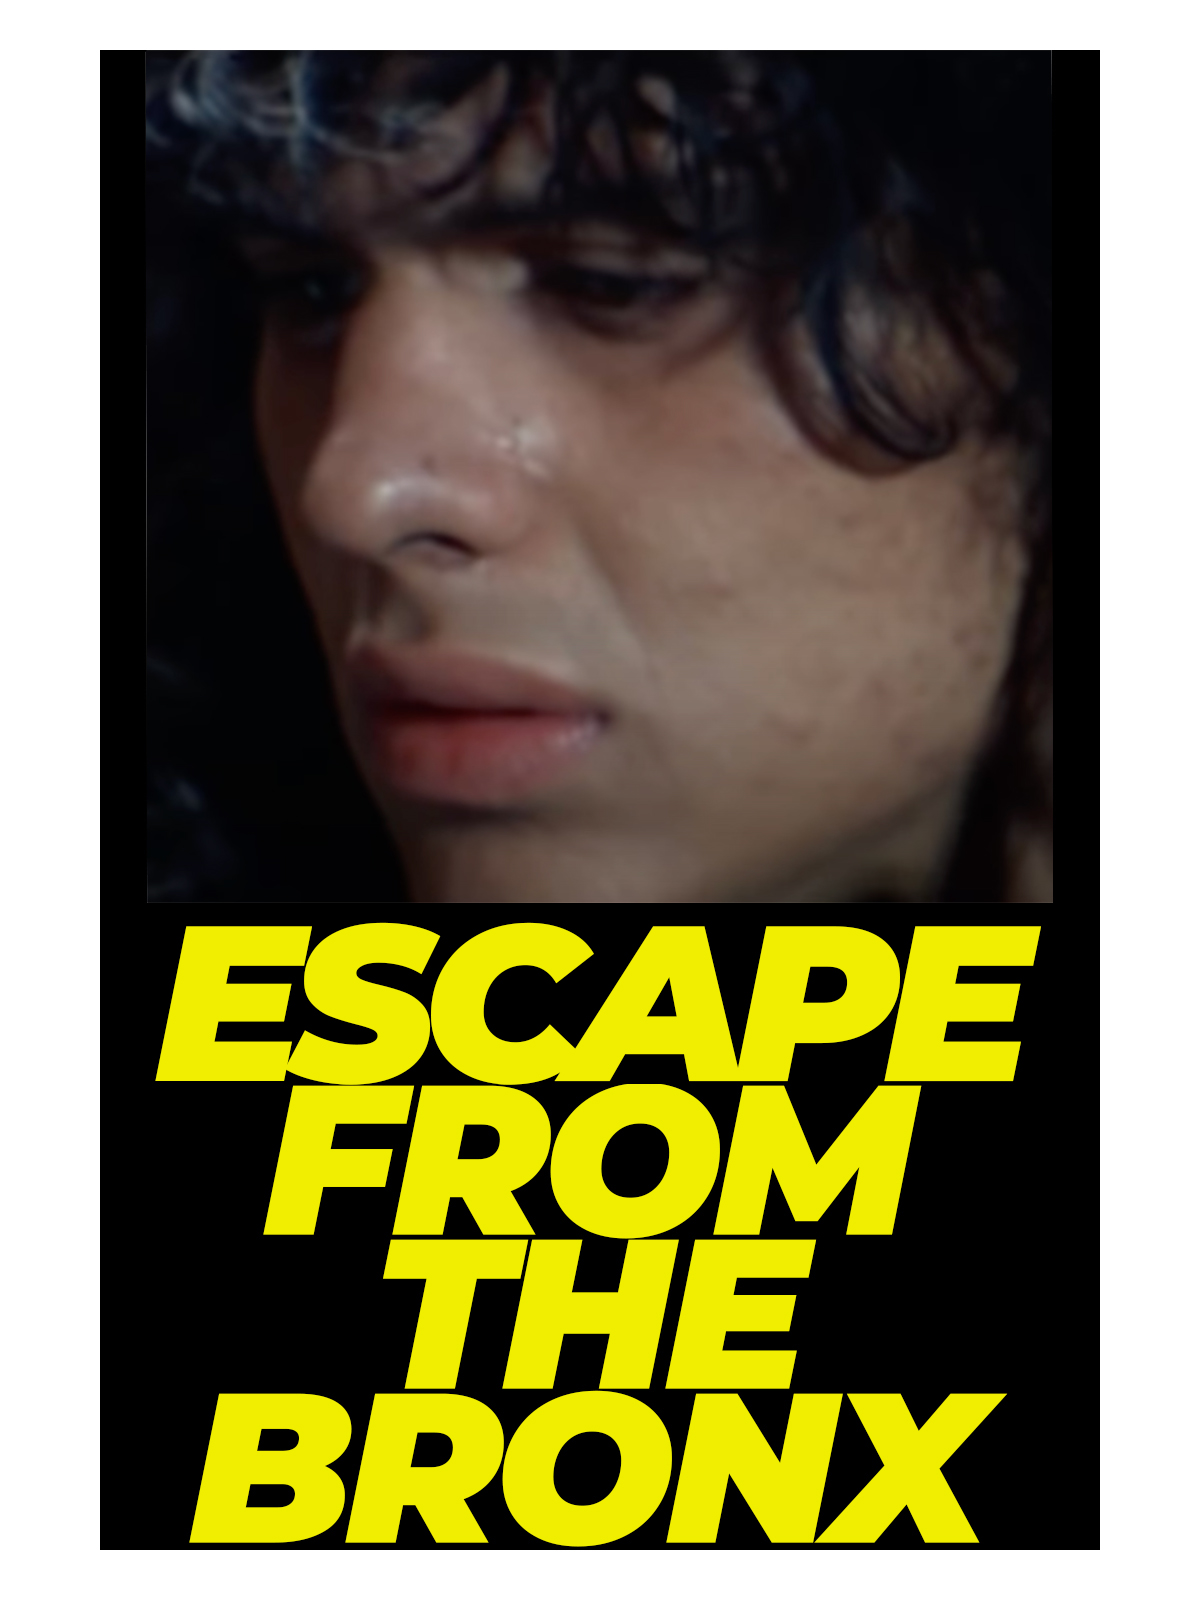 Escape From the Bronx